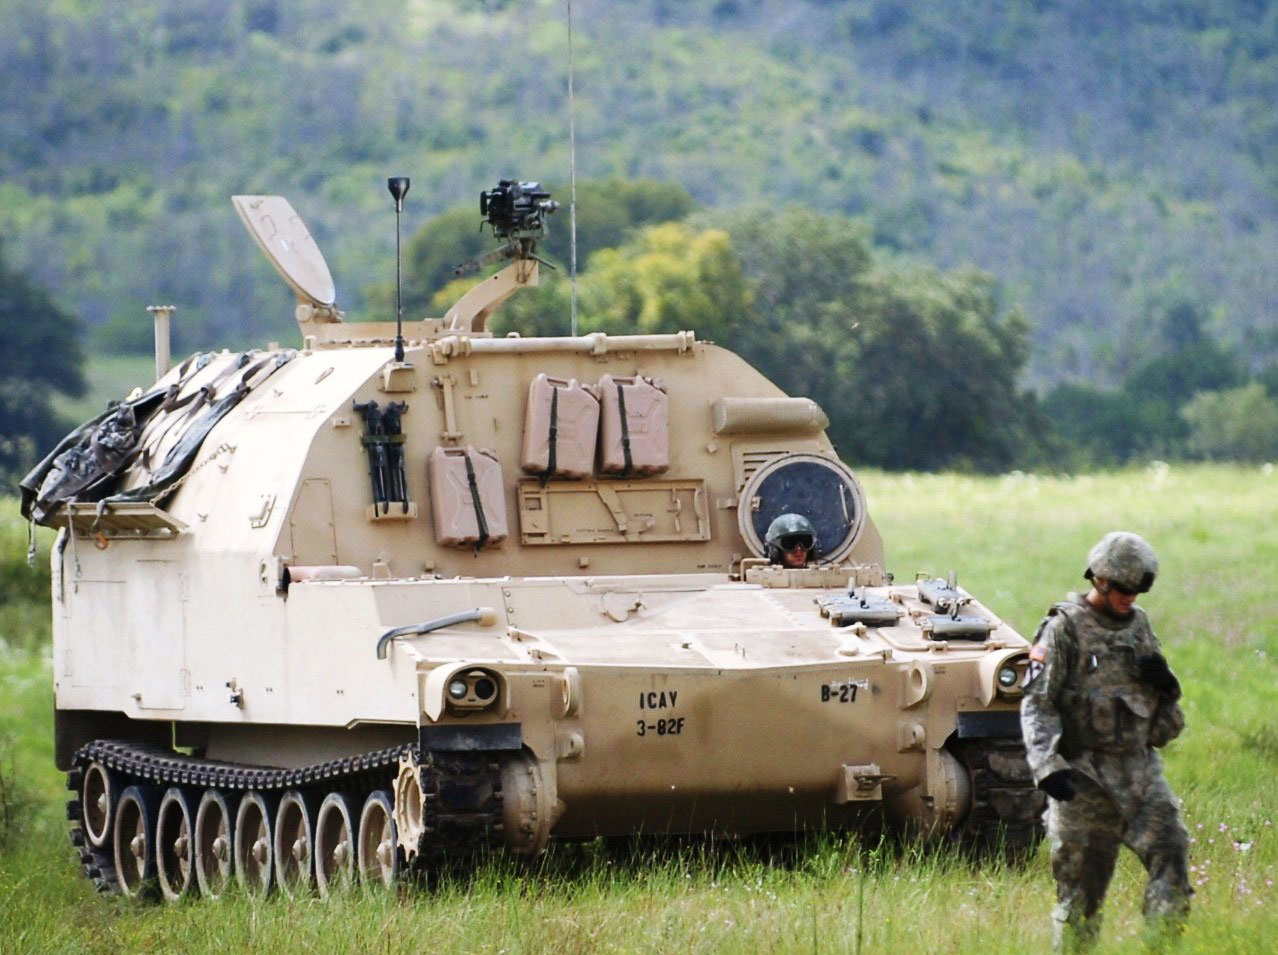 FORT HOOD, Texas— Artillerymen from B. Battery, 3rd Battalion, 82nd Field Artillery Regiment, 2nd Brigade Combat Team, 1st Cavalry Division, move a M992A2 Field Artillery Ammunition Supply Vehicle across the range to a M109A6 Paladin to provide support during the 3rd Bn, 82nd FA Regt.’s Paladin live-fire exercise at a range on Fort Hood, Sept. 22. (U.S. Army photo by Sgt Quentin Johnson, 2nd BCT PAO, 1st Cav. Div.)